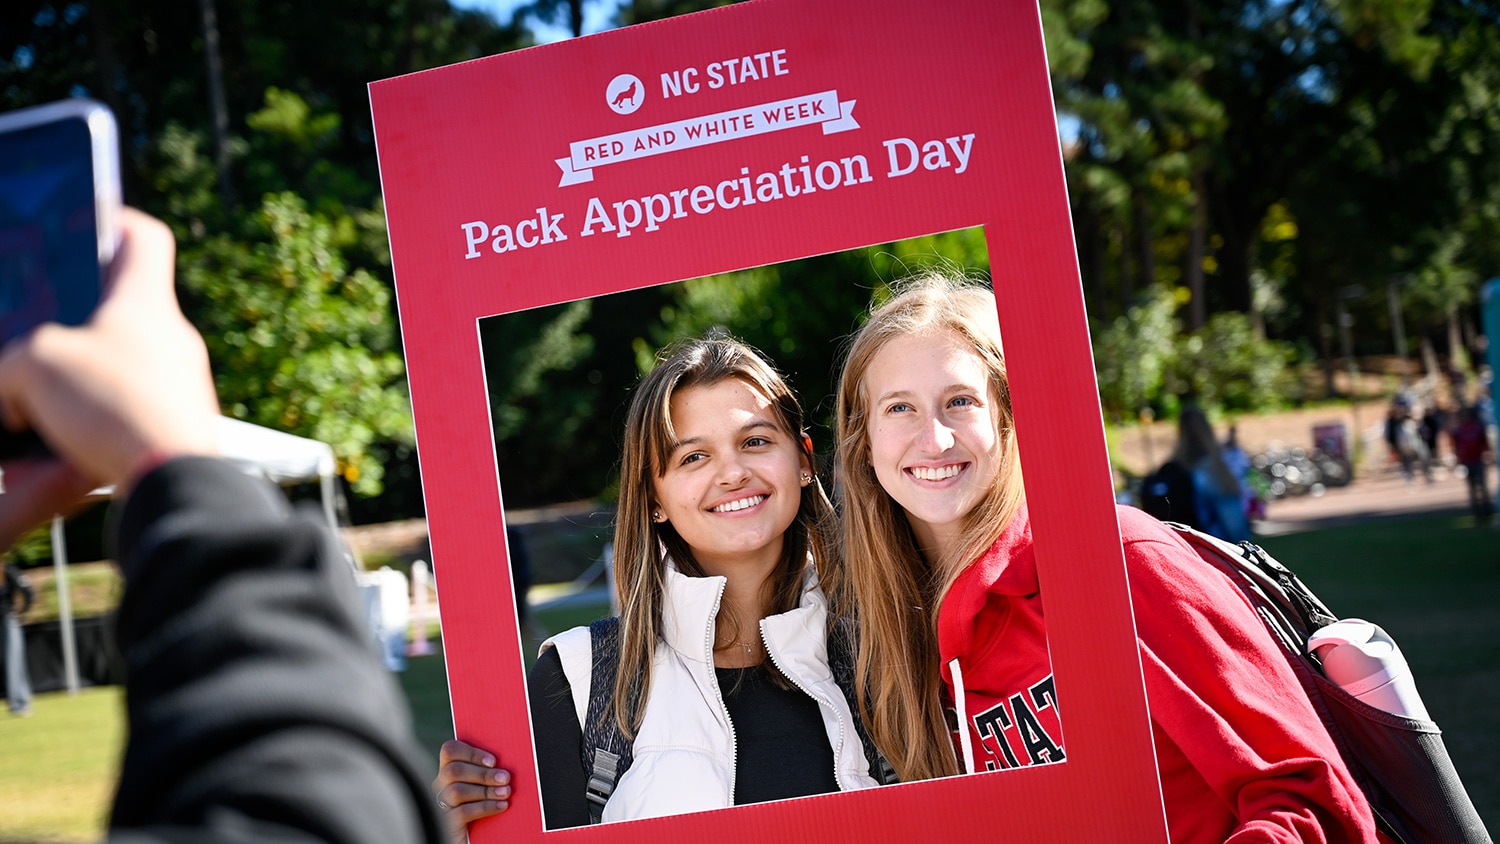 Two students pose for a photo holding a frame with the words "NC State Red and White Week Pack Appreciation Day".